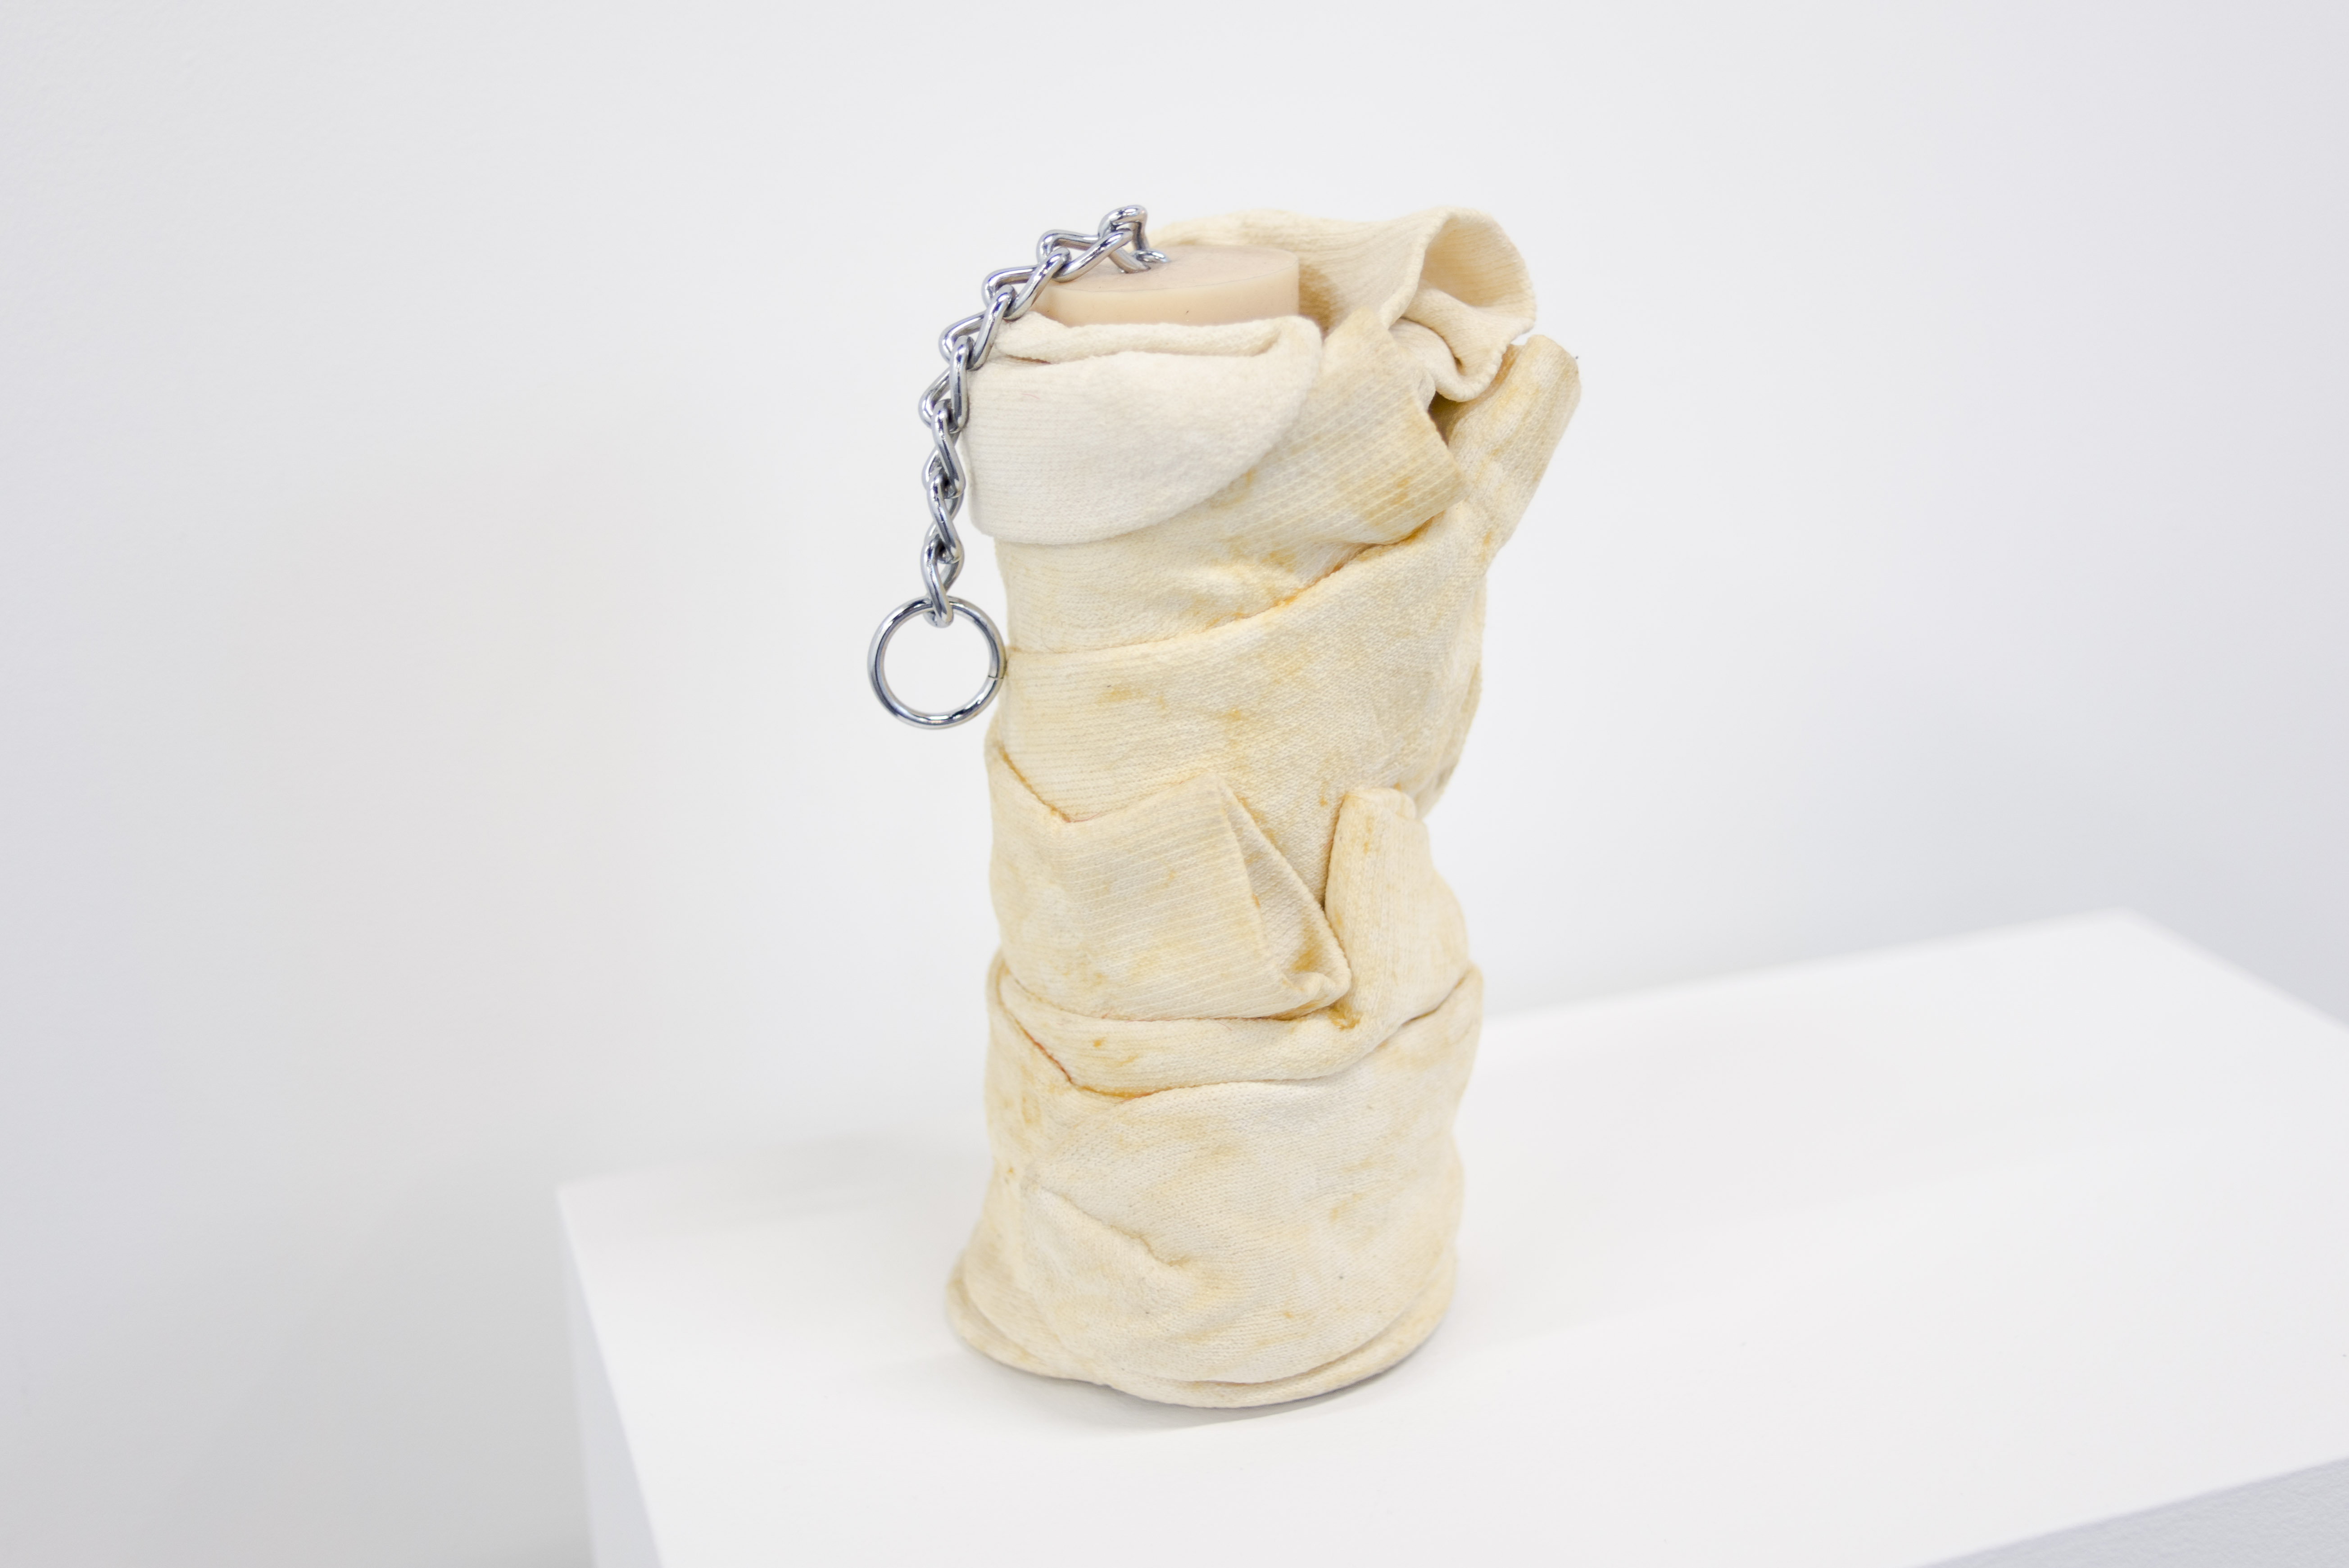 Isaac Pool, 40 Volume, White, a vase covered in soiled white socks with the chain of a dong hanging from its mouth